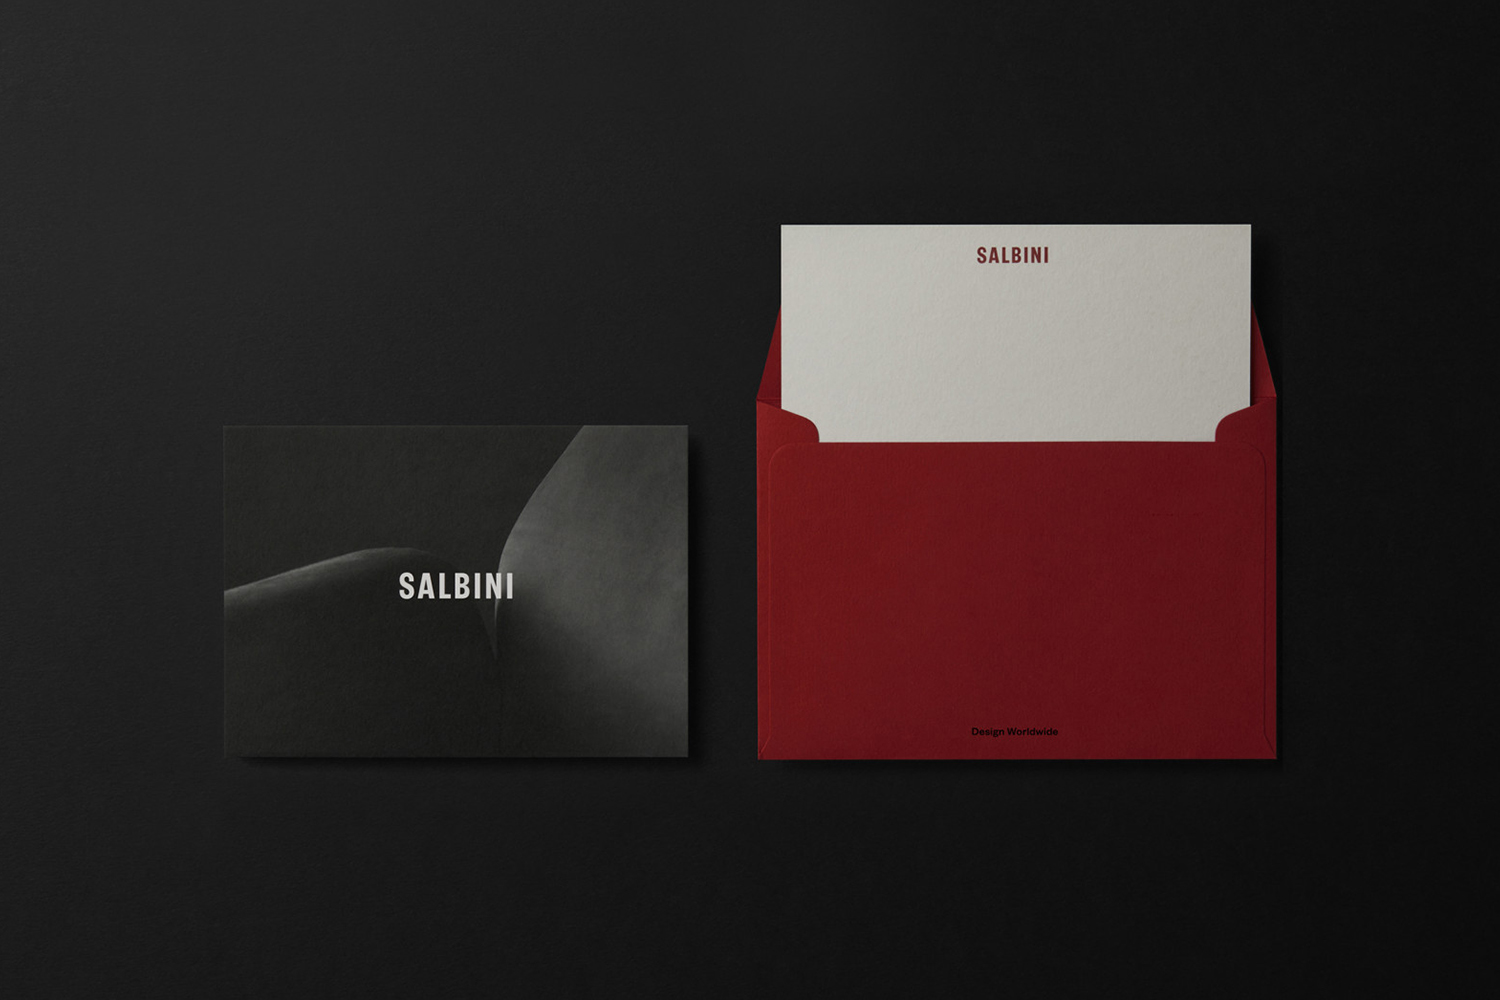 Logotype and Colorplan stationery by Studio Brave for Italian online furniture retailer Salbini.